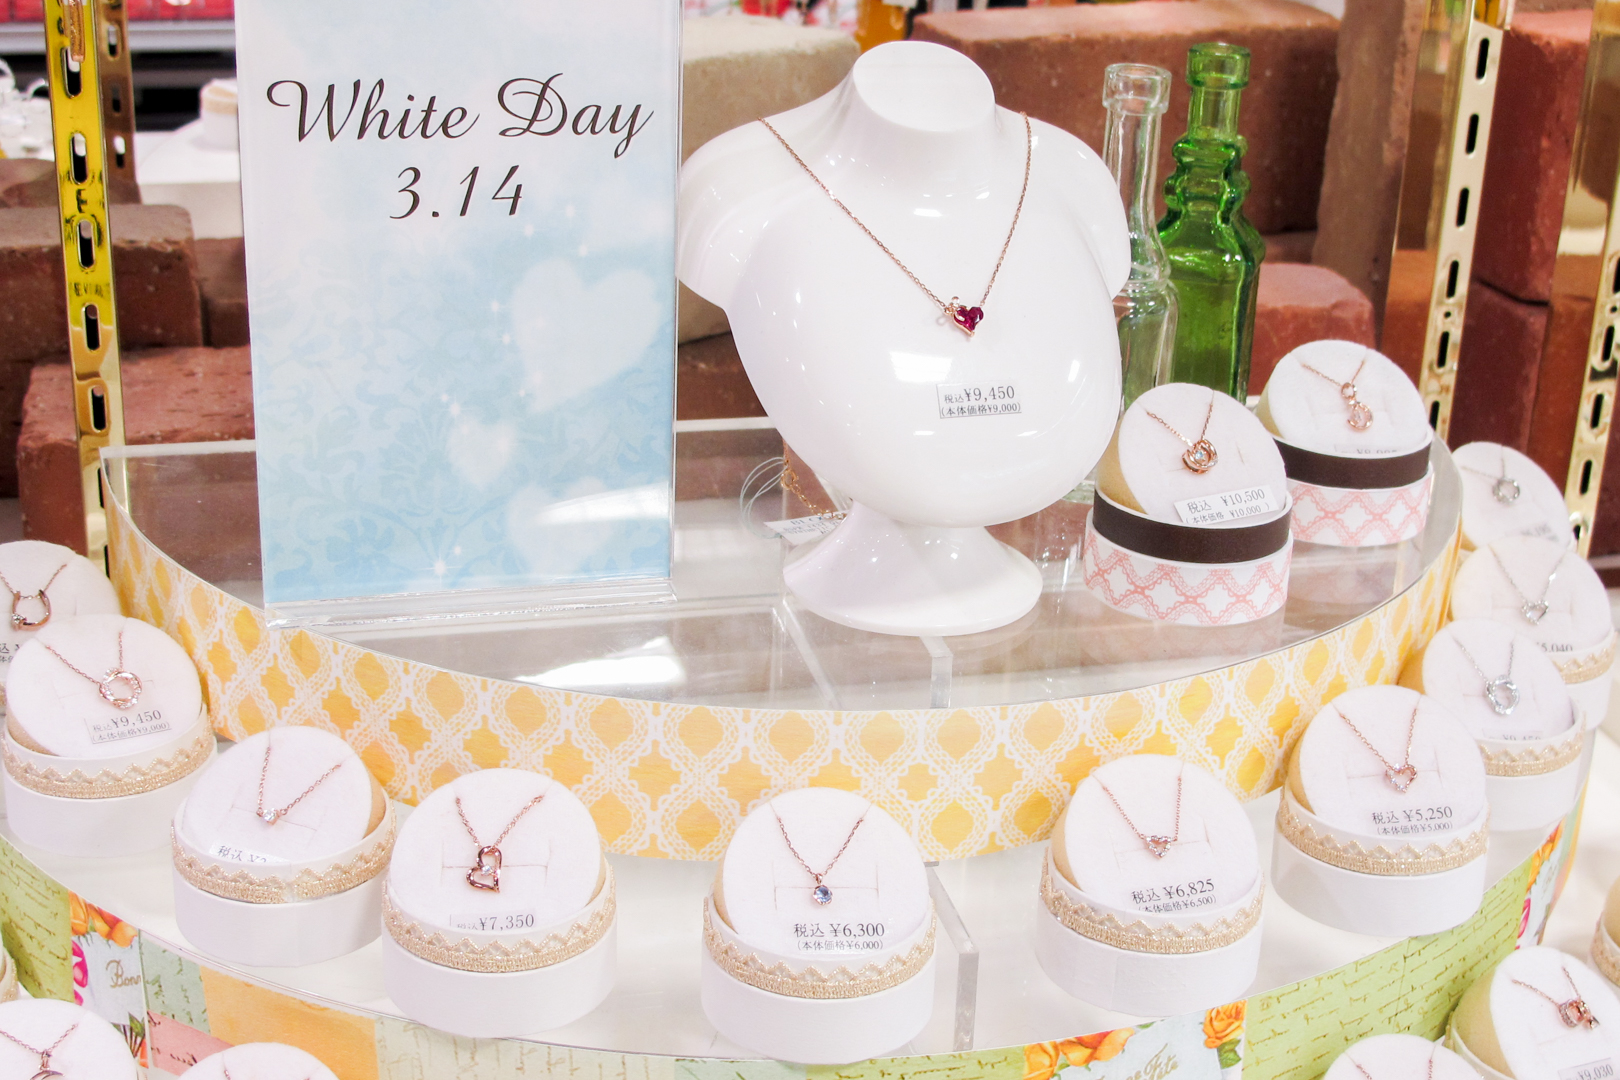 White Day in Japan: Japan's Complicated Second Valentine's Day